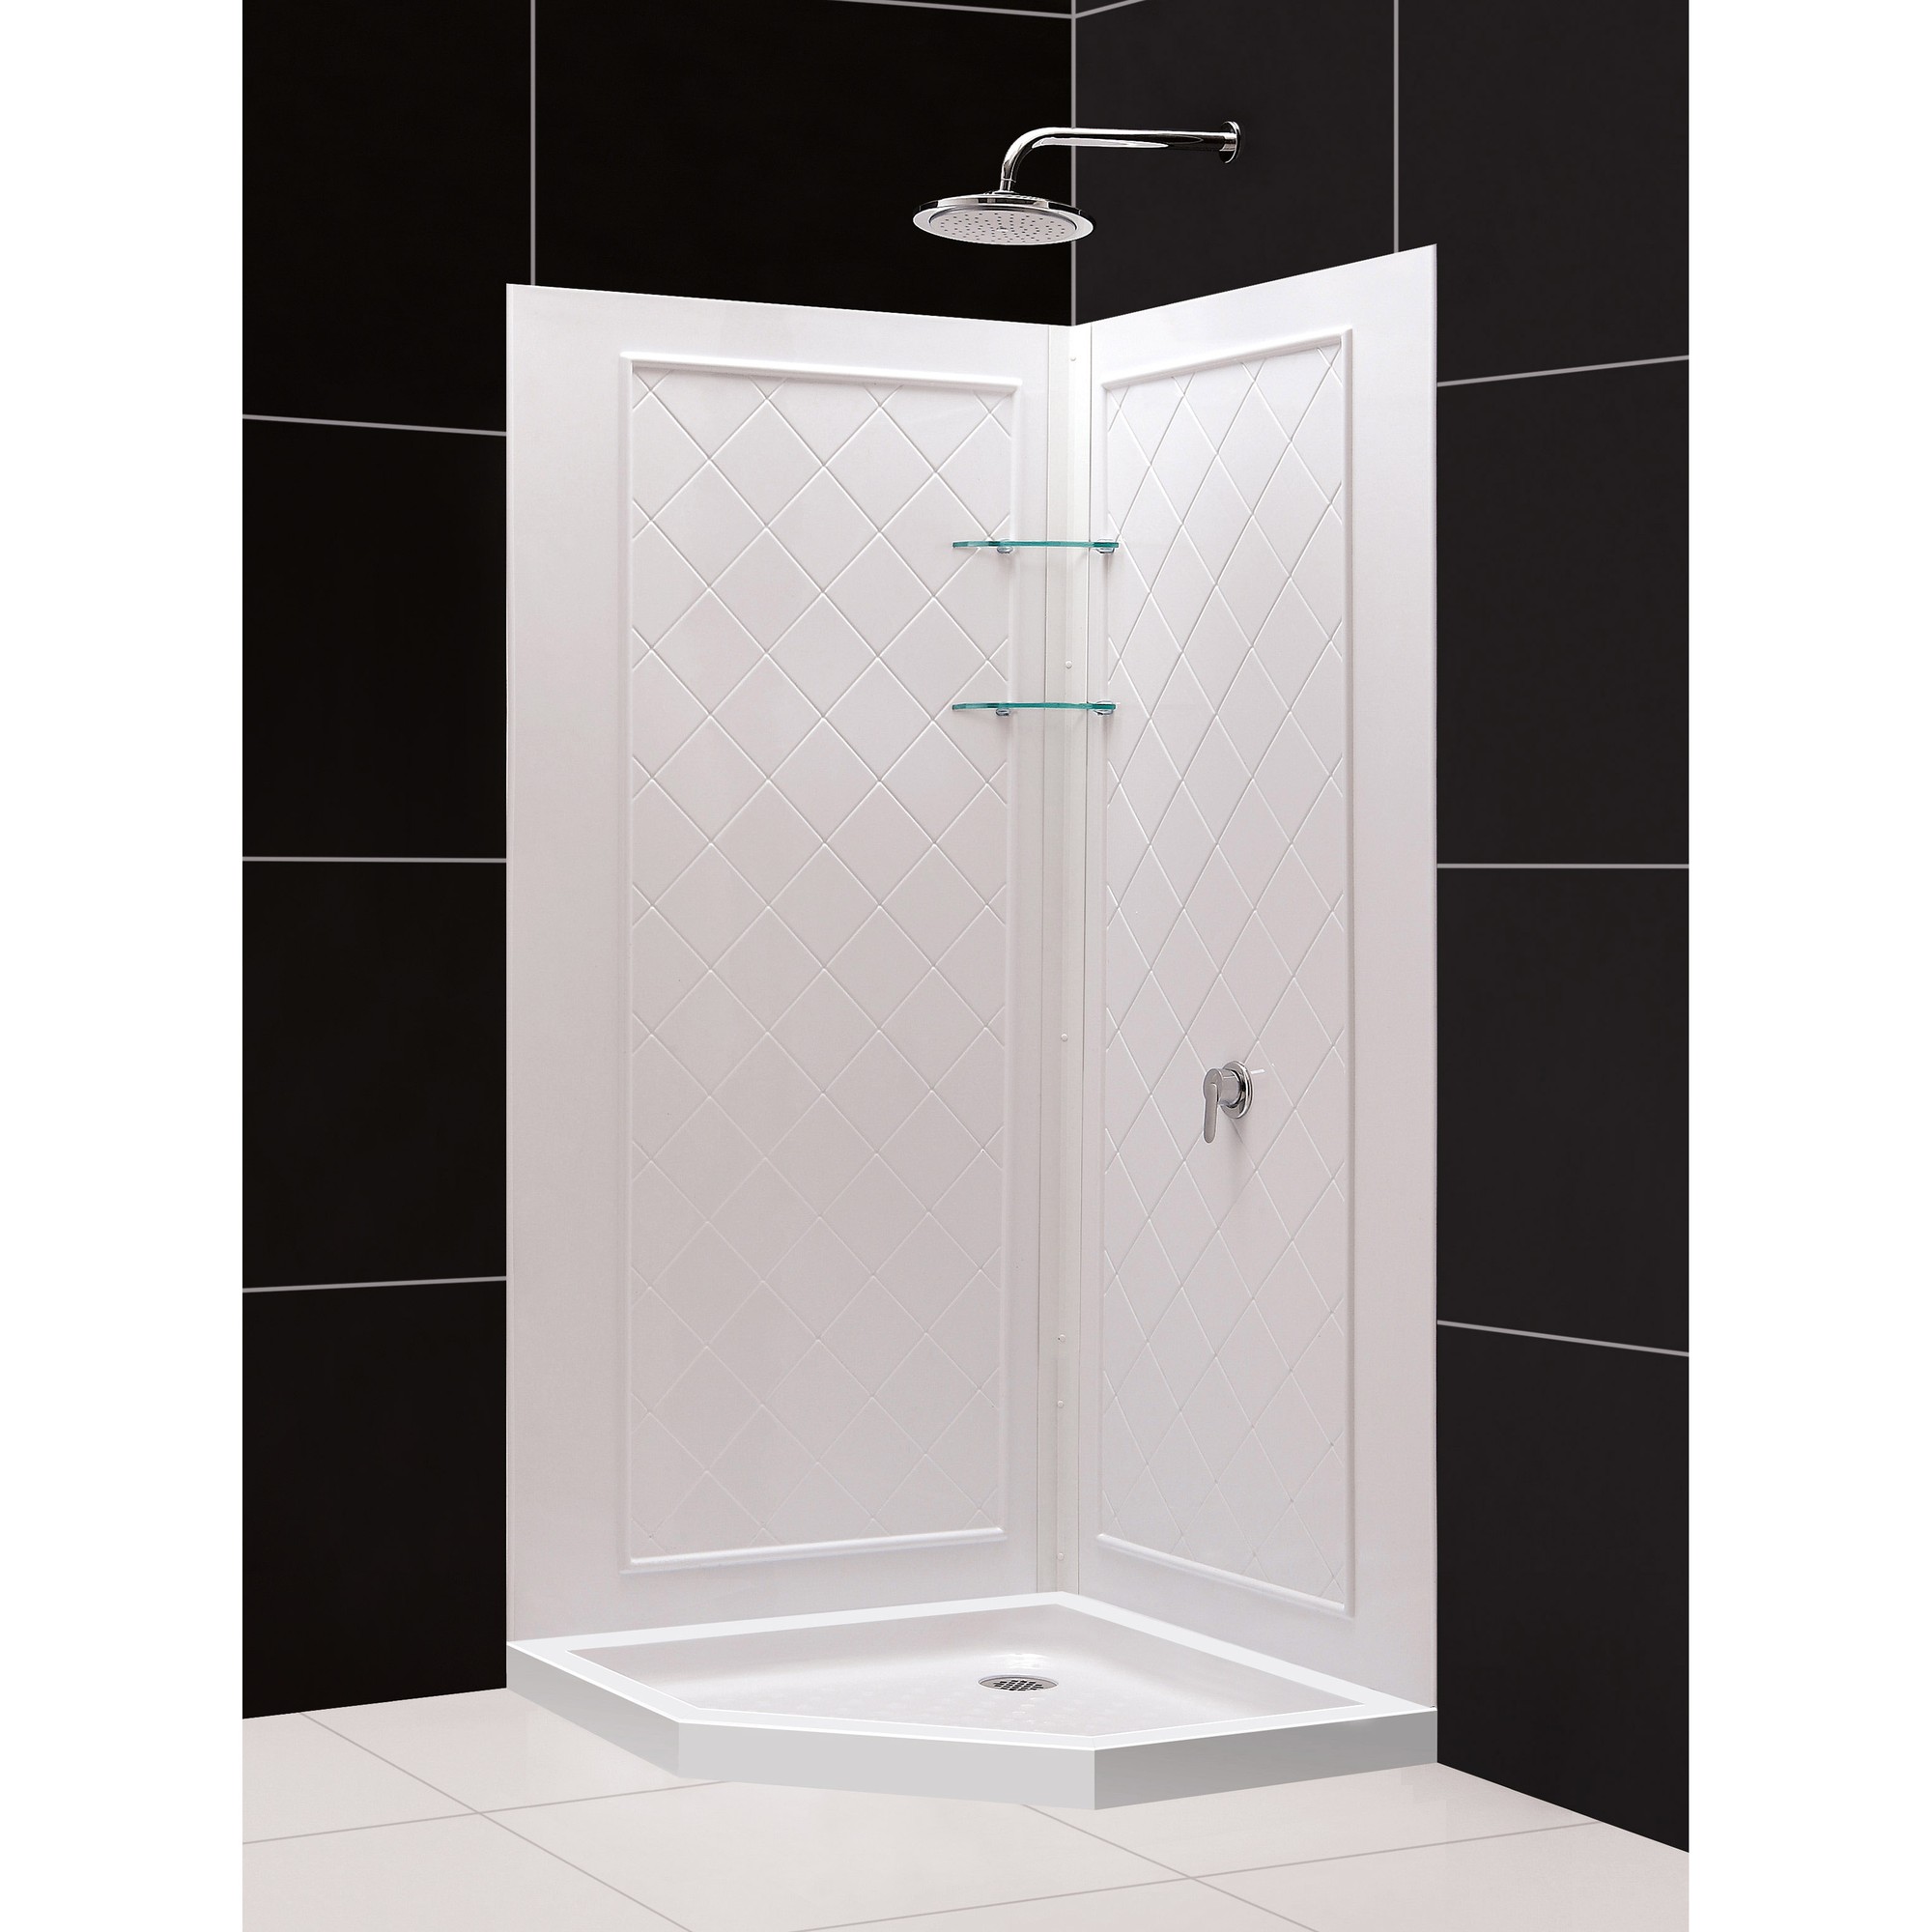 DreamLine 38 in. x 38 in. x 76 3/4 in. H Neo-Angle Shower Base and QWALL-4 Acrylic Corner Backwall Kit in White